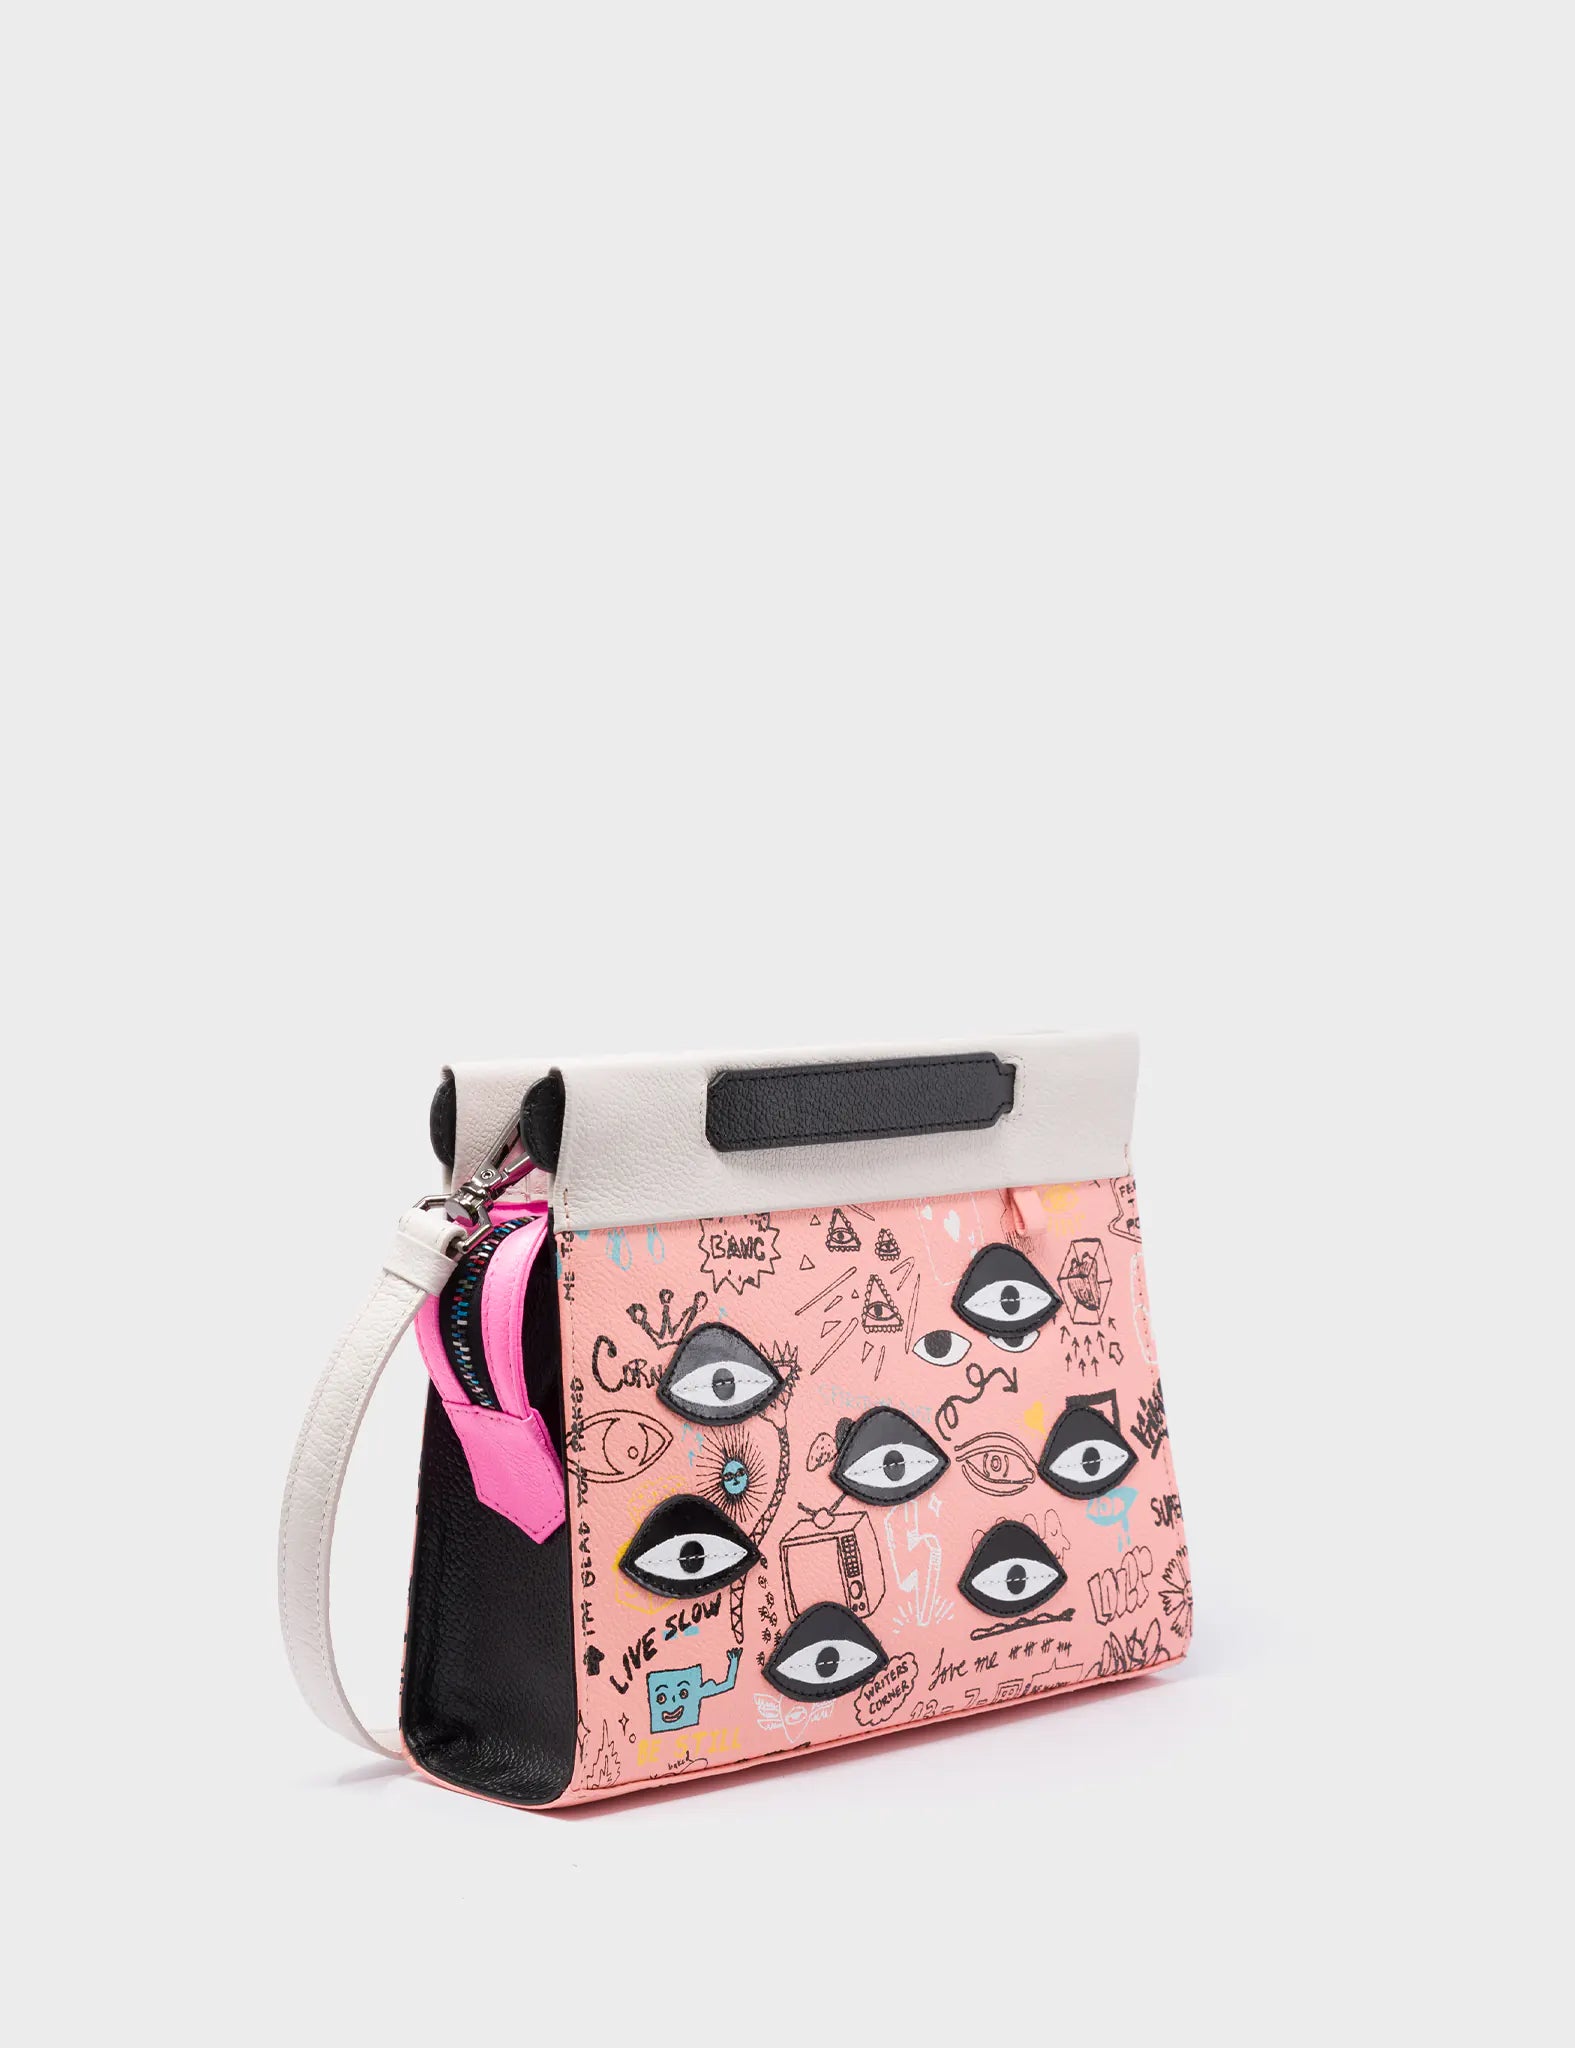 Vali Crossbody Small Rosa Leather Bag - Urban Doodles Print and Eyes Applique - Main View